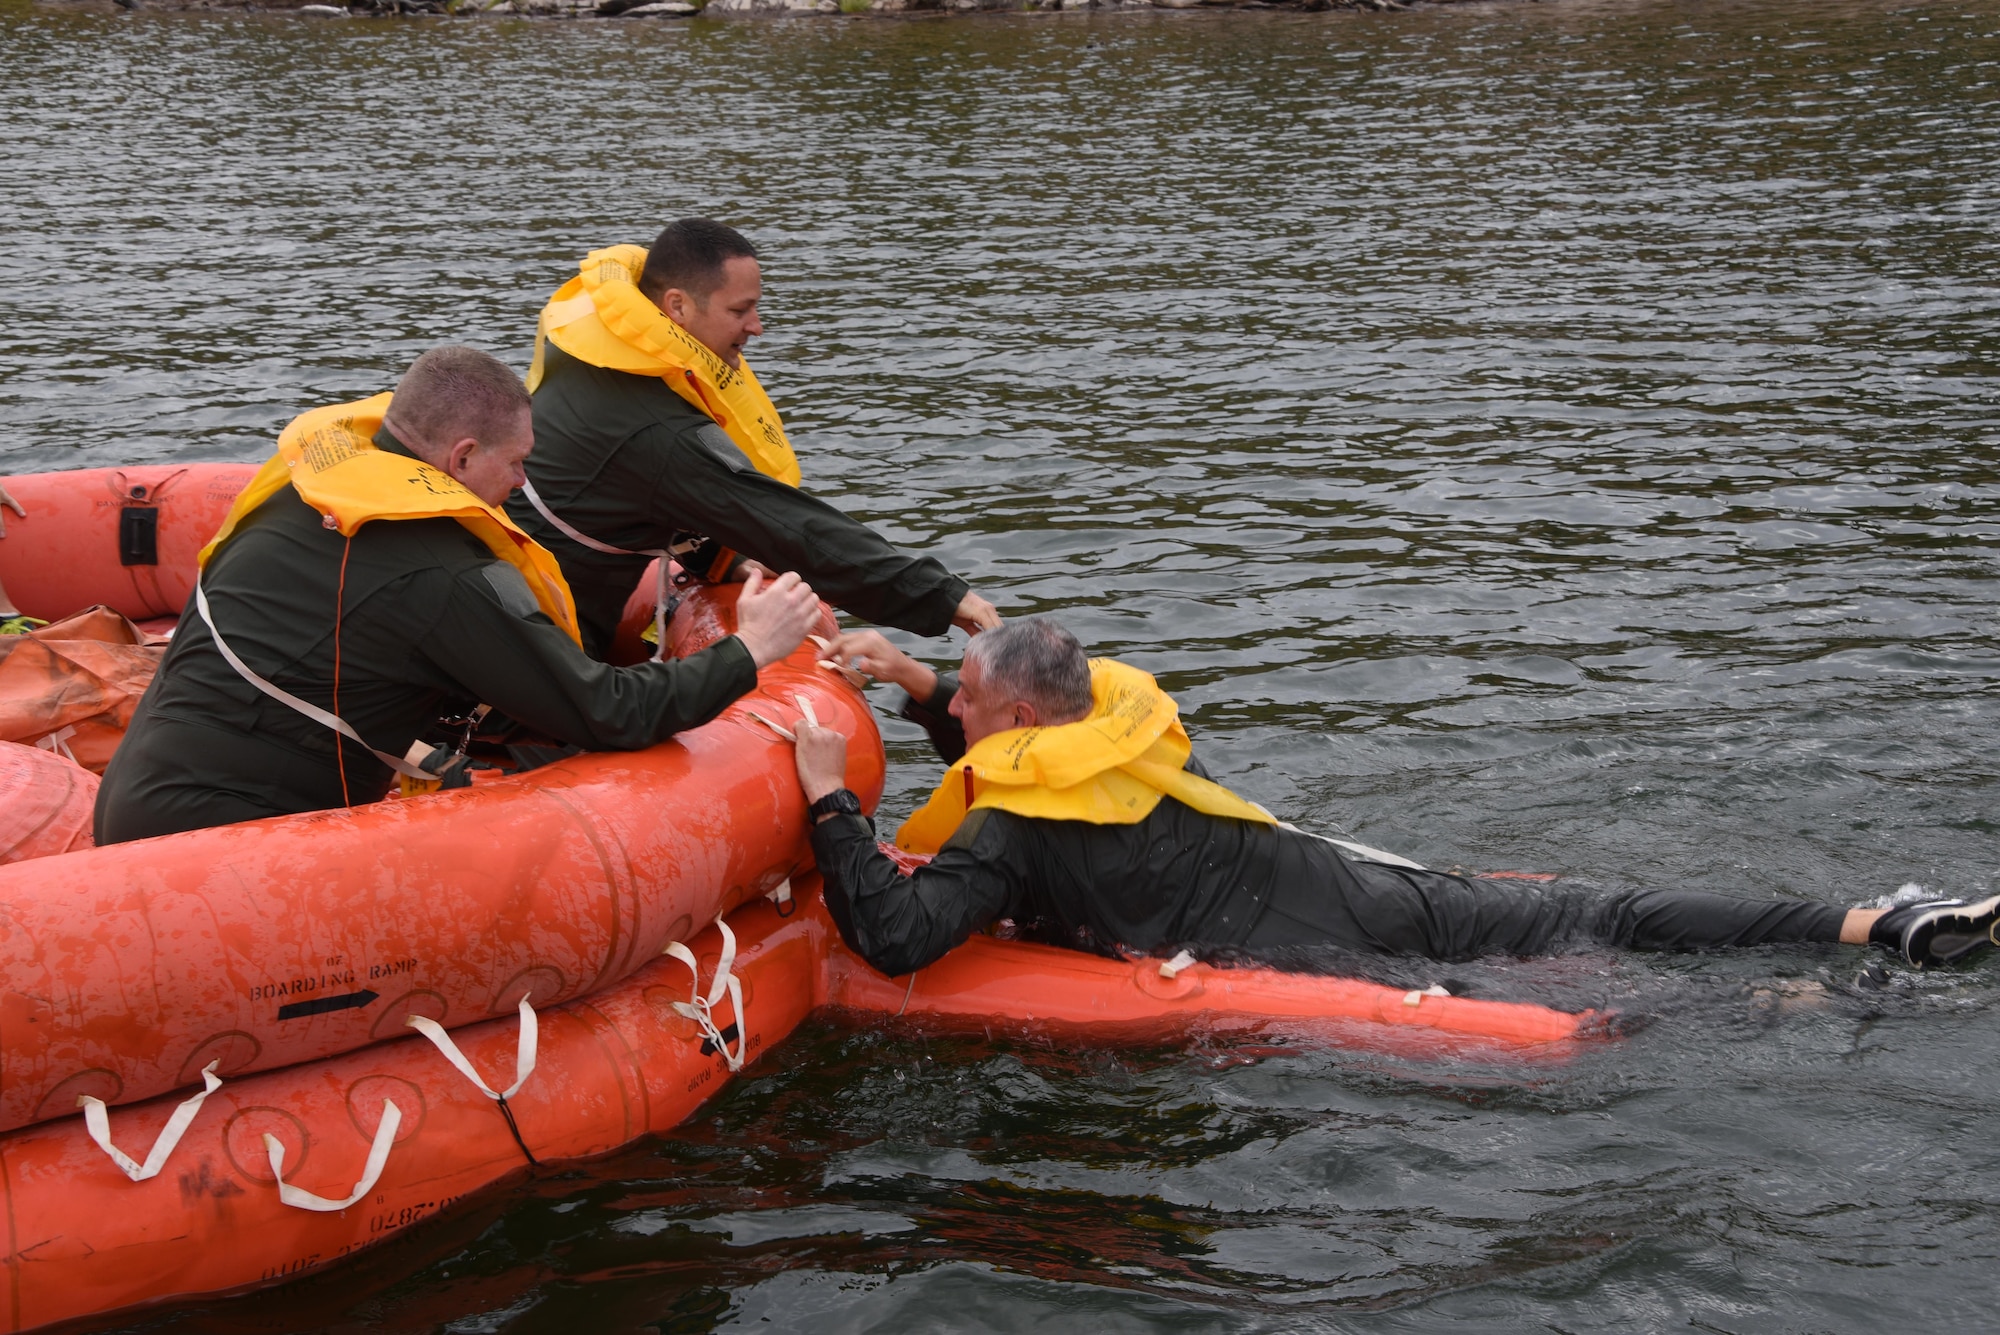 KC-135 Stratotanker aircrew members help one another aboard a 20-man life raft during water survival training at Lake Pleasant aquatic center, Ariz., May 7, 2017. Water survival training is conducted every two years at the 161st Air Refueling Wing to refresh the aircrew on using the life support equipment on board the aircraft in the event of an emergency. (U.S. Air Force photo by Tech. Sgt. Michael Matkin) 